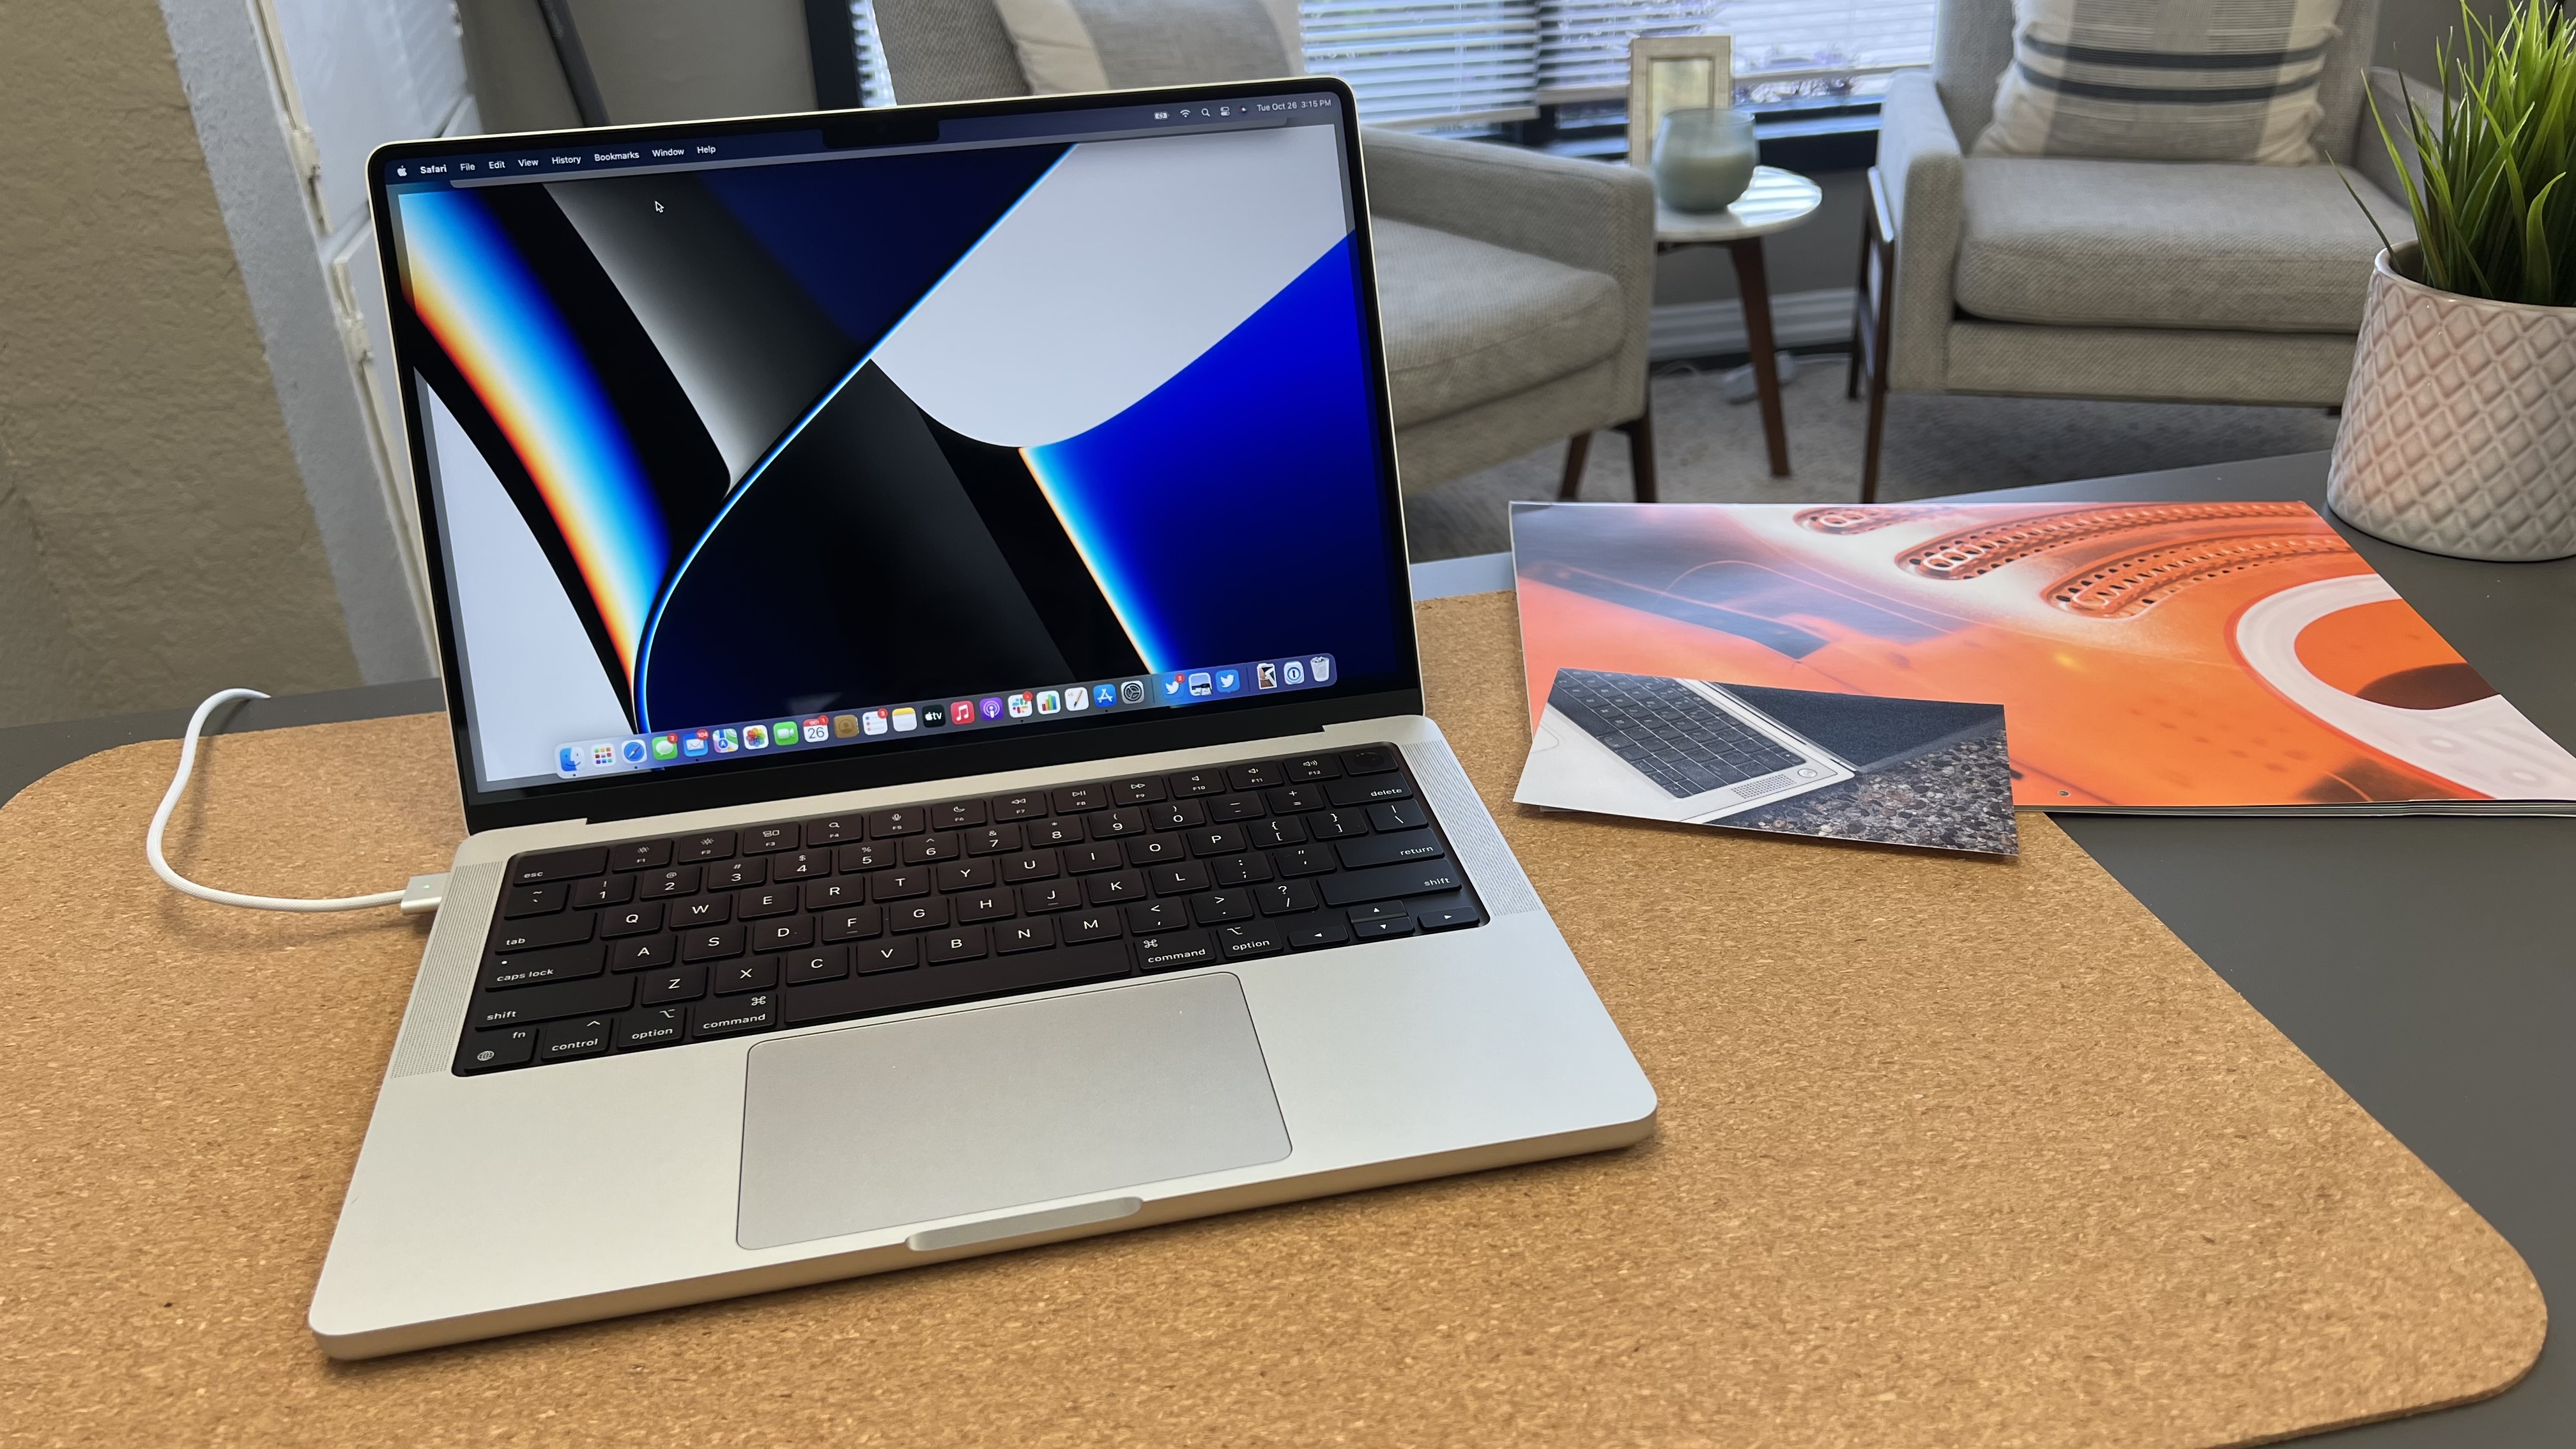 Hands-On: The New 14-Inch Macbook Pro Is A Stunning Return To Form - 9To5Mac